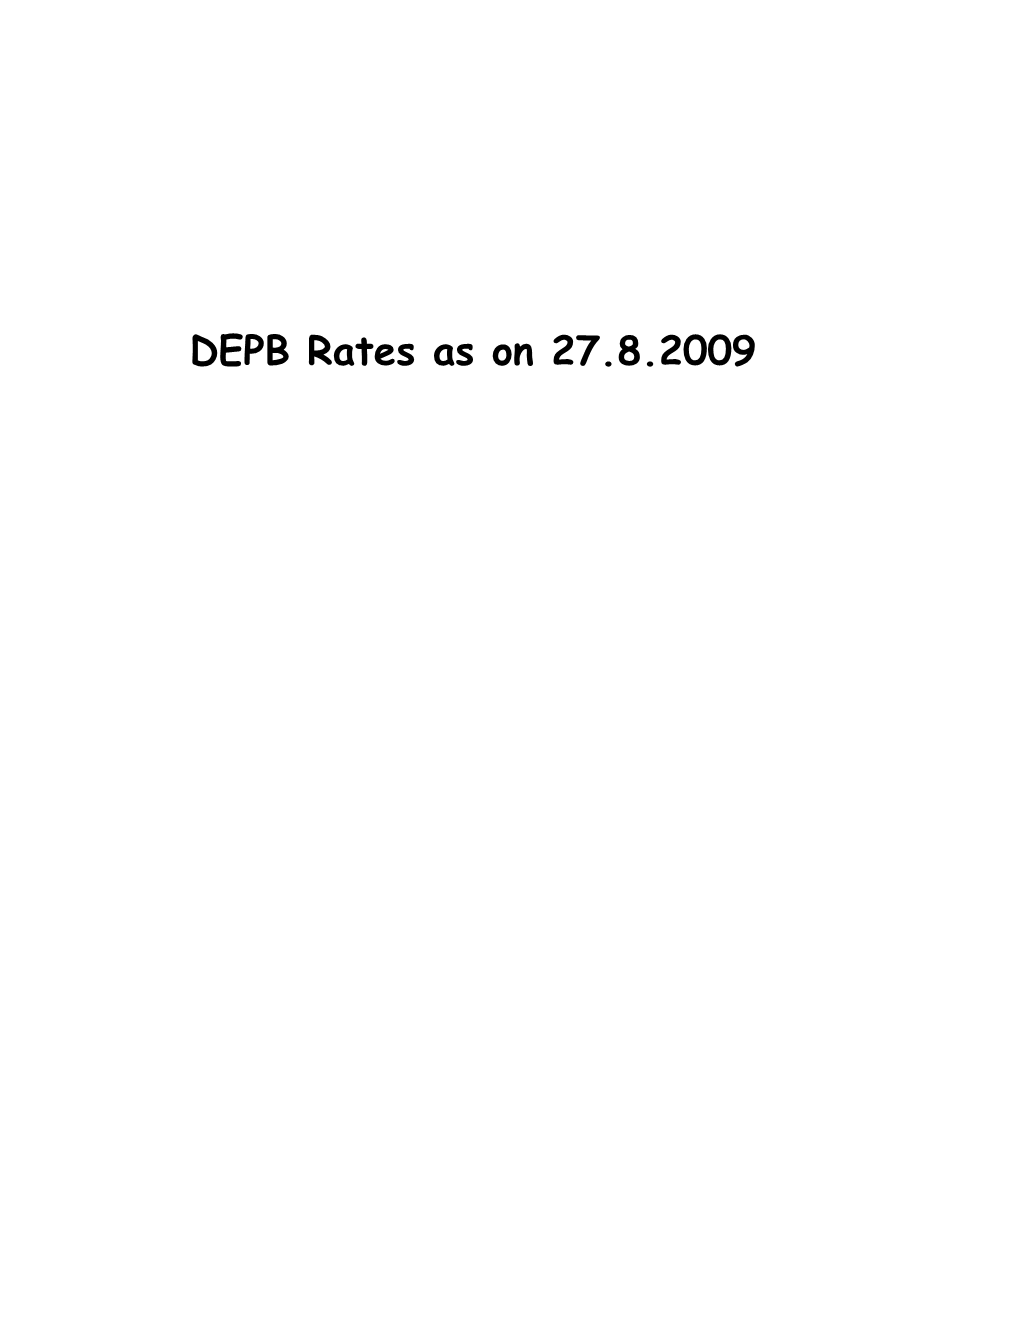 DEPB Rates As on 27